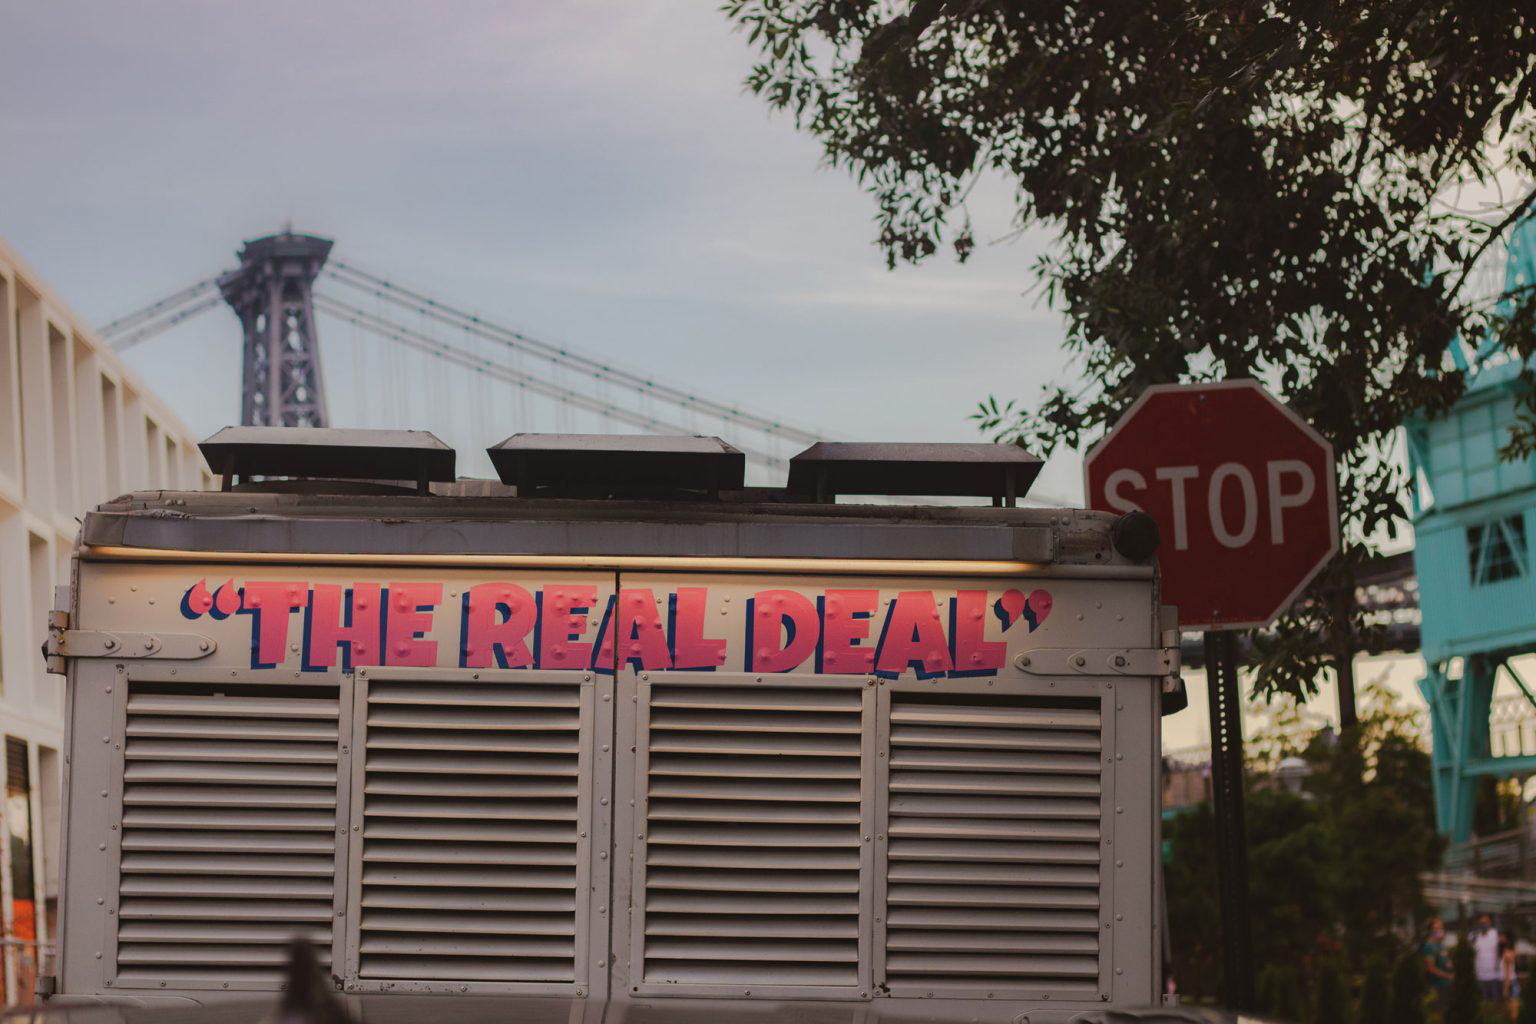 The back of an ice cream truck labeled with "The Real Deal" in bright pink.